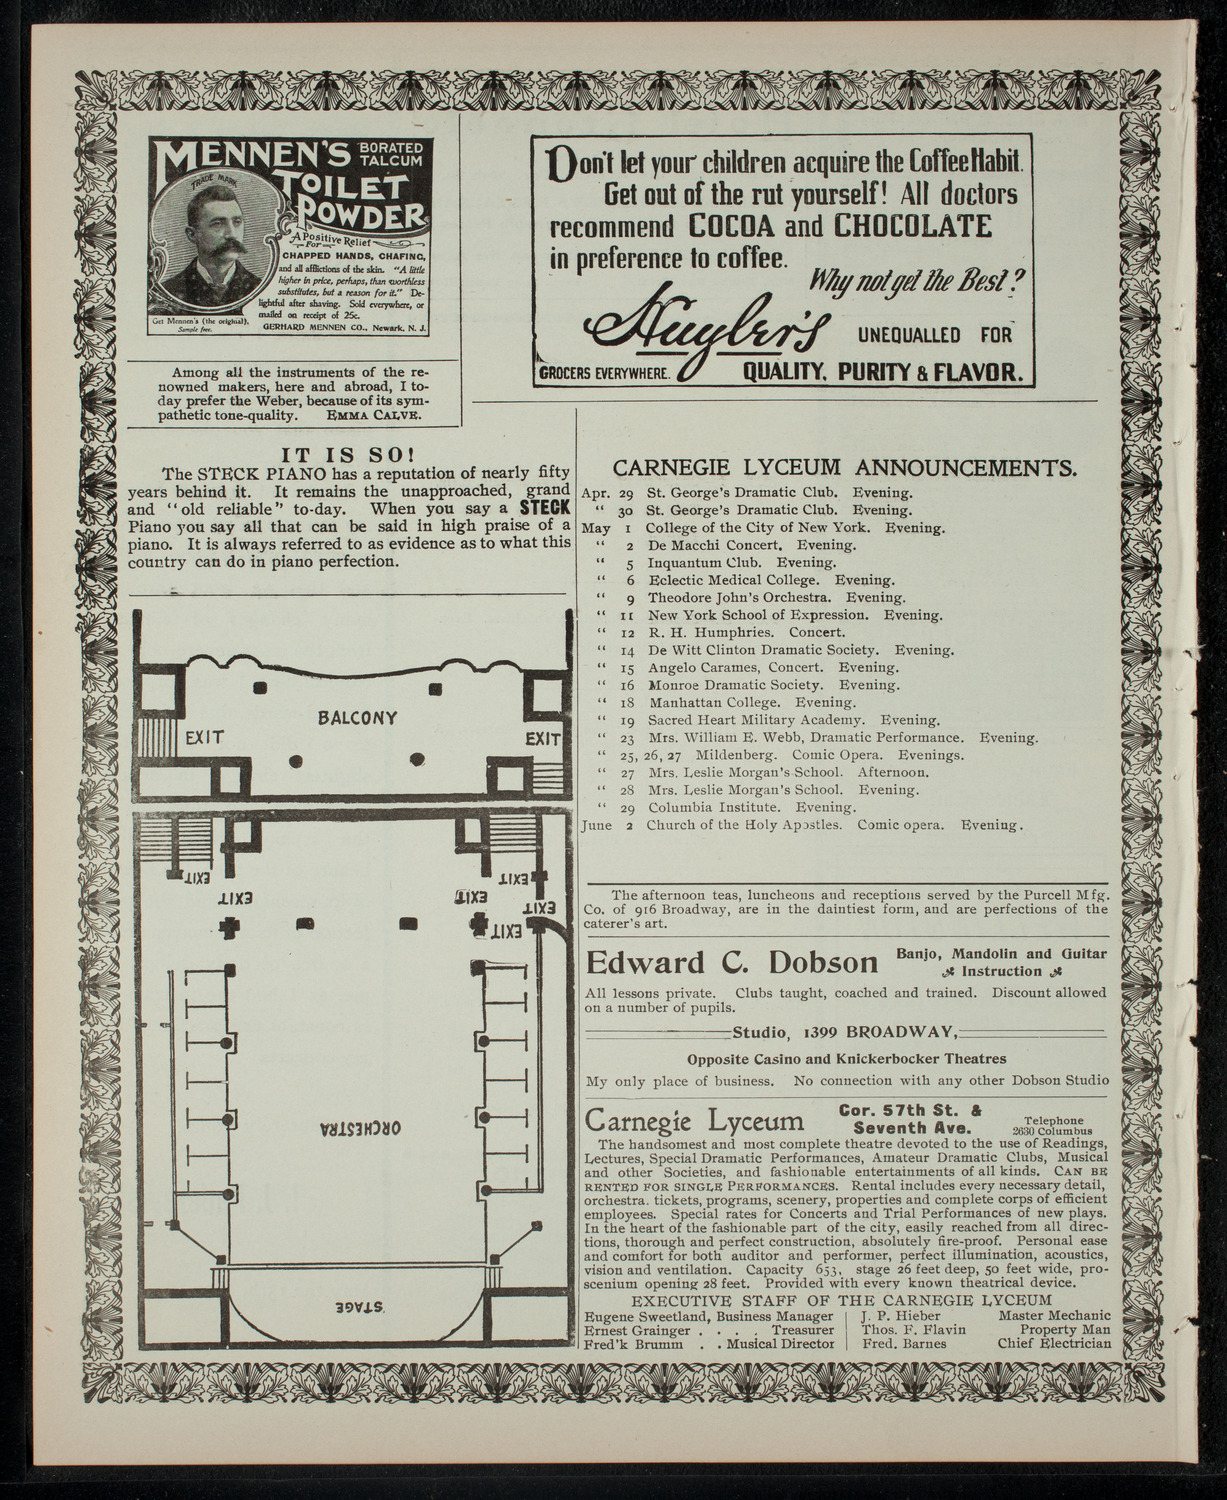 American Academy of Dramatic Arts, April 29, 1903, program page 4